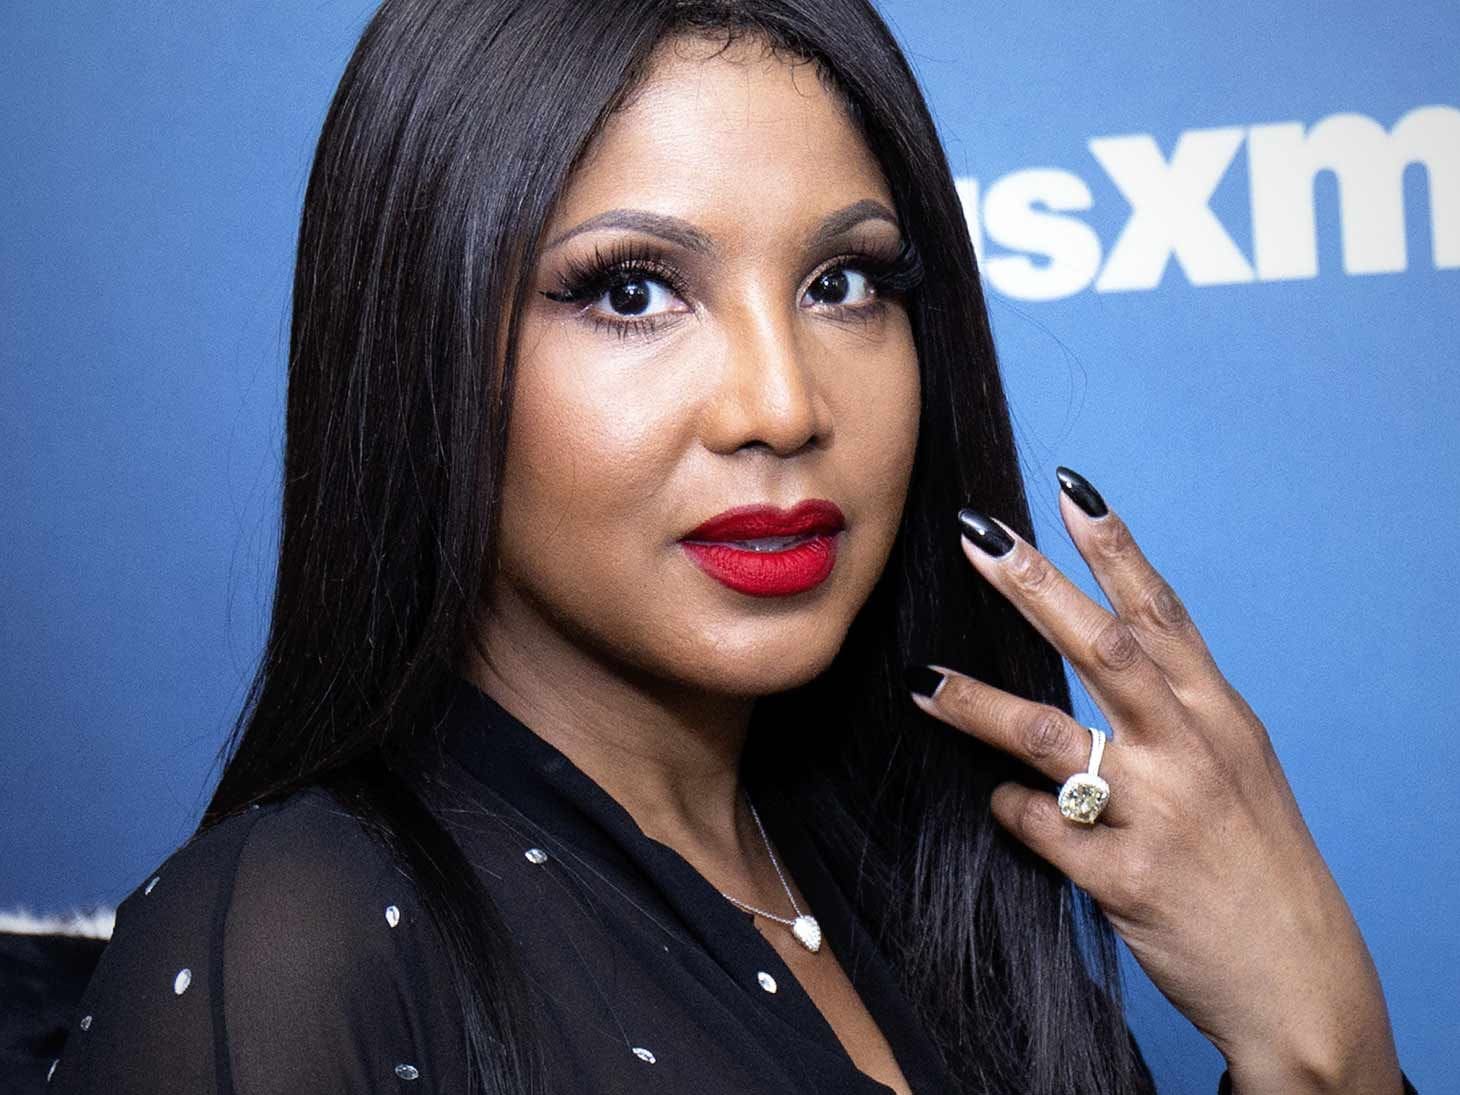 Toni Braxton Goes Blonde And Fans Are In Love With The New Look